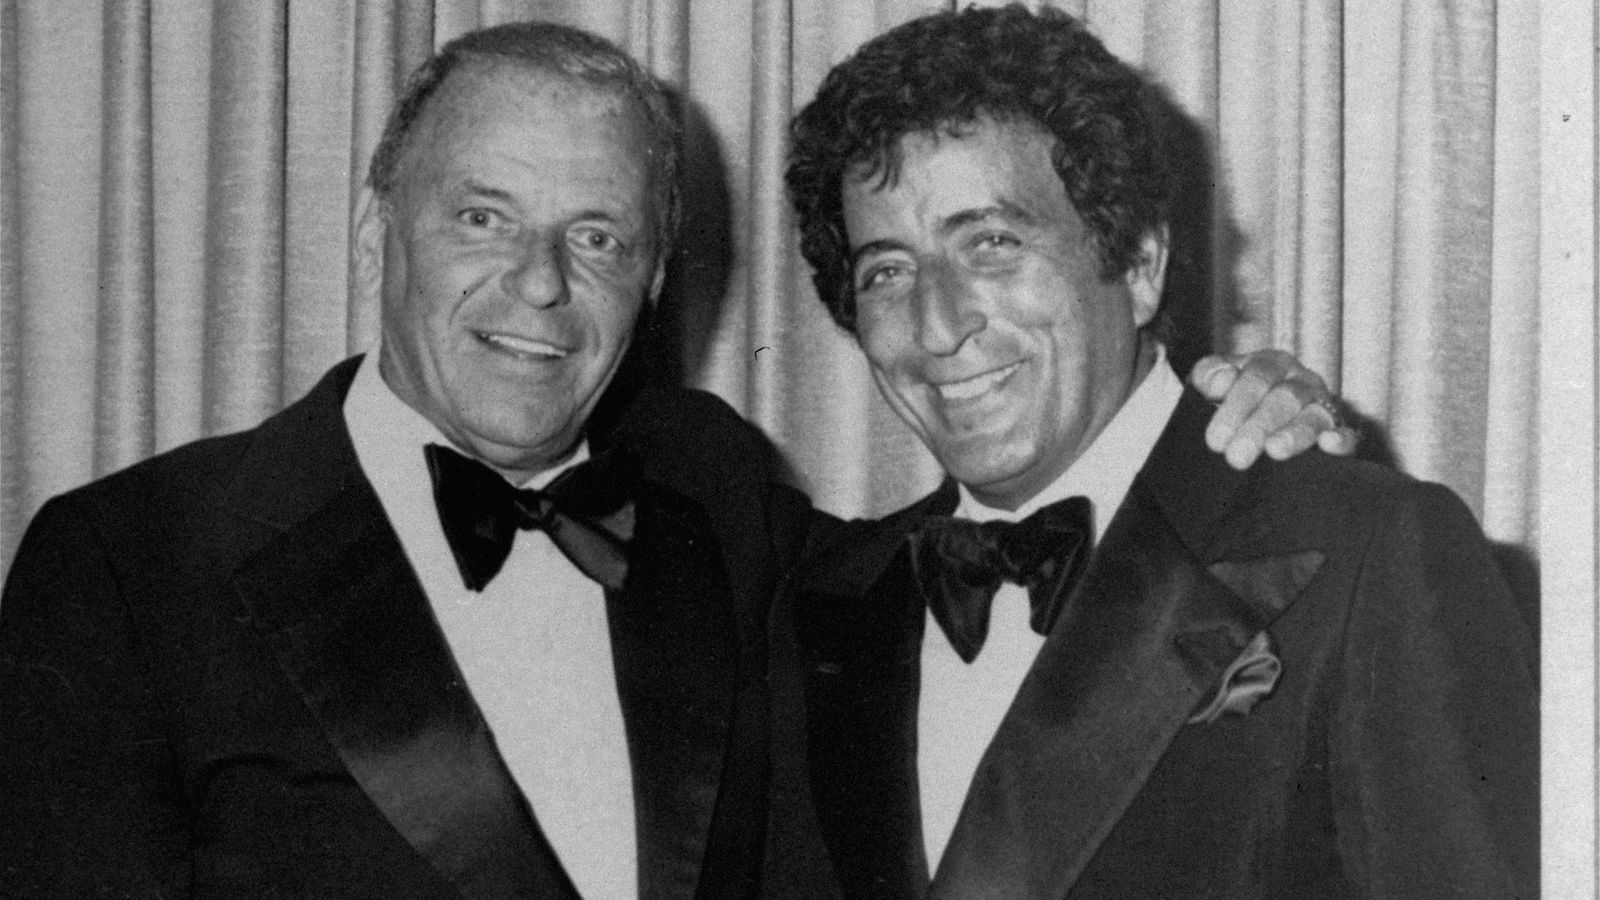 Tony Bennett dies: 'The best singer in the business' - how words from his idol Frank Sinatra changed his career